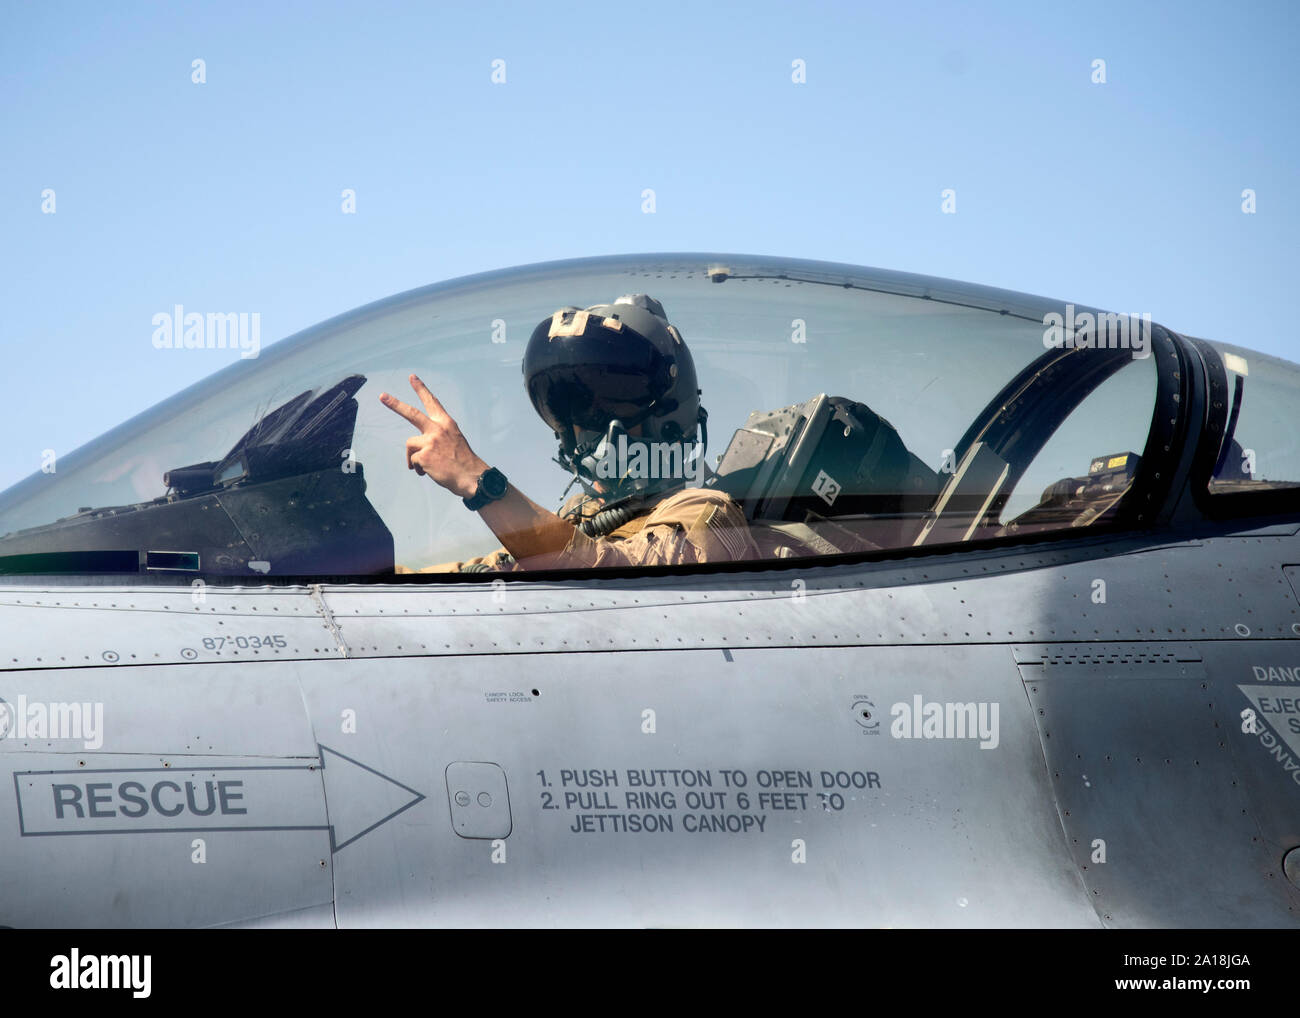 Lt. Col. Stalker, pilot for the 176th Expeditionary Fighter Squadron, deployed to Bagram Airfield, Afghanistan, taxis the F-16C aircraft after his 221st combat sortie, where he reached 1,000 combat flight hours. Less than 10 pilots under the rank of Colonel have logged 1,000 combat flying hours. (U.S. Air Force photo by Tech. Sgt. Isaac Garden/Released) Stock Photo